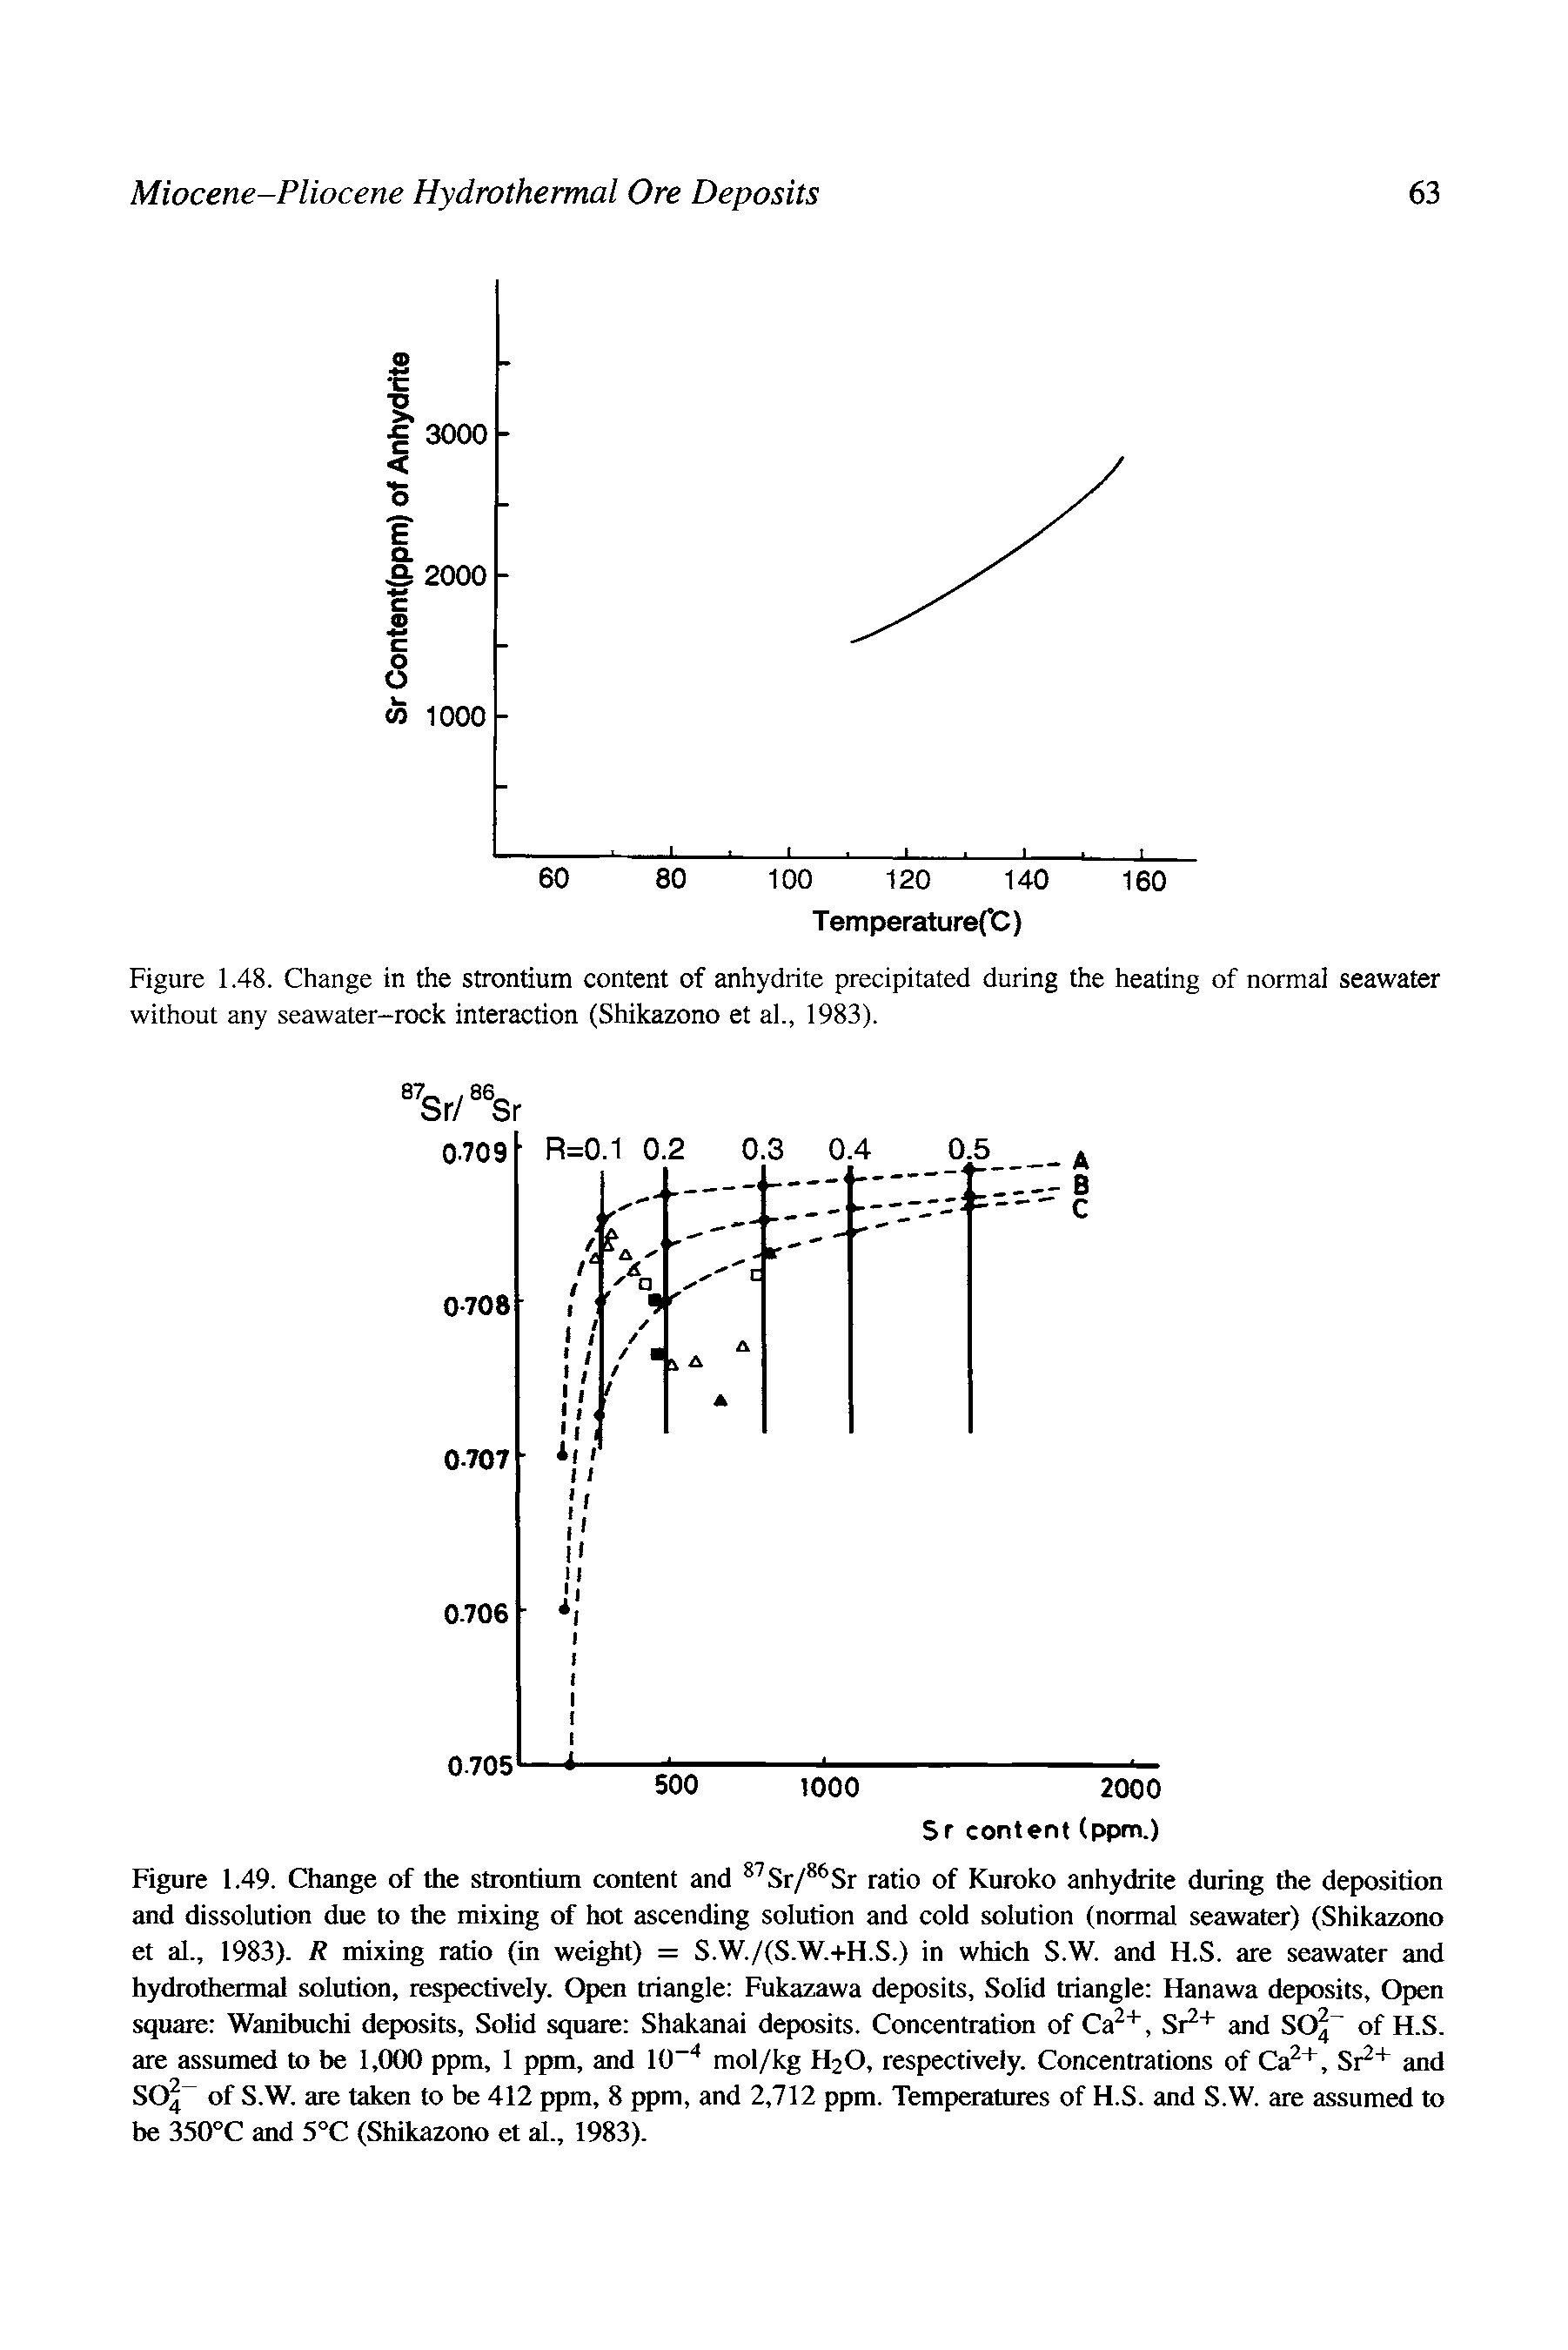 Figure 1.49. Change of the strontium content and Sr/ Sr ratio of Kuroko anhydrite during the deposition and dissolution due to the mixing of hot ascending solution and cold solution (normal seawater) (Shikazono et al., 1983). R mixing ratio (in weight) = S.W./(S.W.+H.S.) in which S.W. and H.S. are seawater and hydrothermal solution, respectively. Open triangle Fukazawa deposits. Solid triangle Hanawa deposits. Open square Wanibuchi deposits. Solid square Shakanai deposits. Concentration of Ca, Sr " " and SO of H.S. are assumed to be 1,(XX) ppm, 1 ppm, and 10 mol/kg H2O, respectively. Concentrations of Ca, Sr " and SO of S.W. are taken to be 412 ppm, 8 ppm, and 2,712 ppm. Temperatures of H.S. and S.W. are assumed to be 350°C and 5°C (Shikazono et al., 1983).